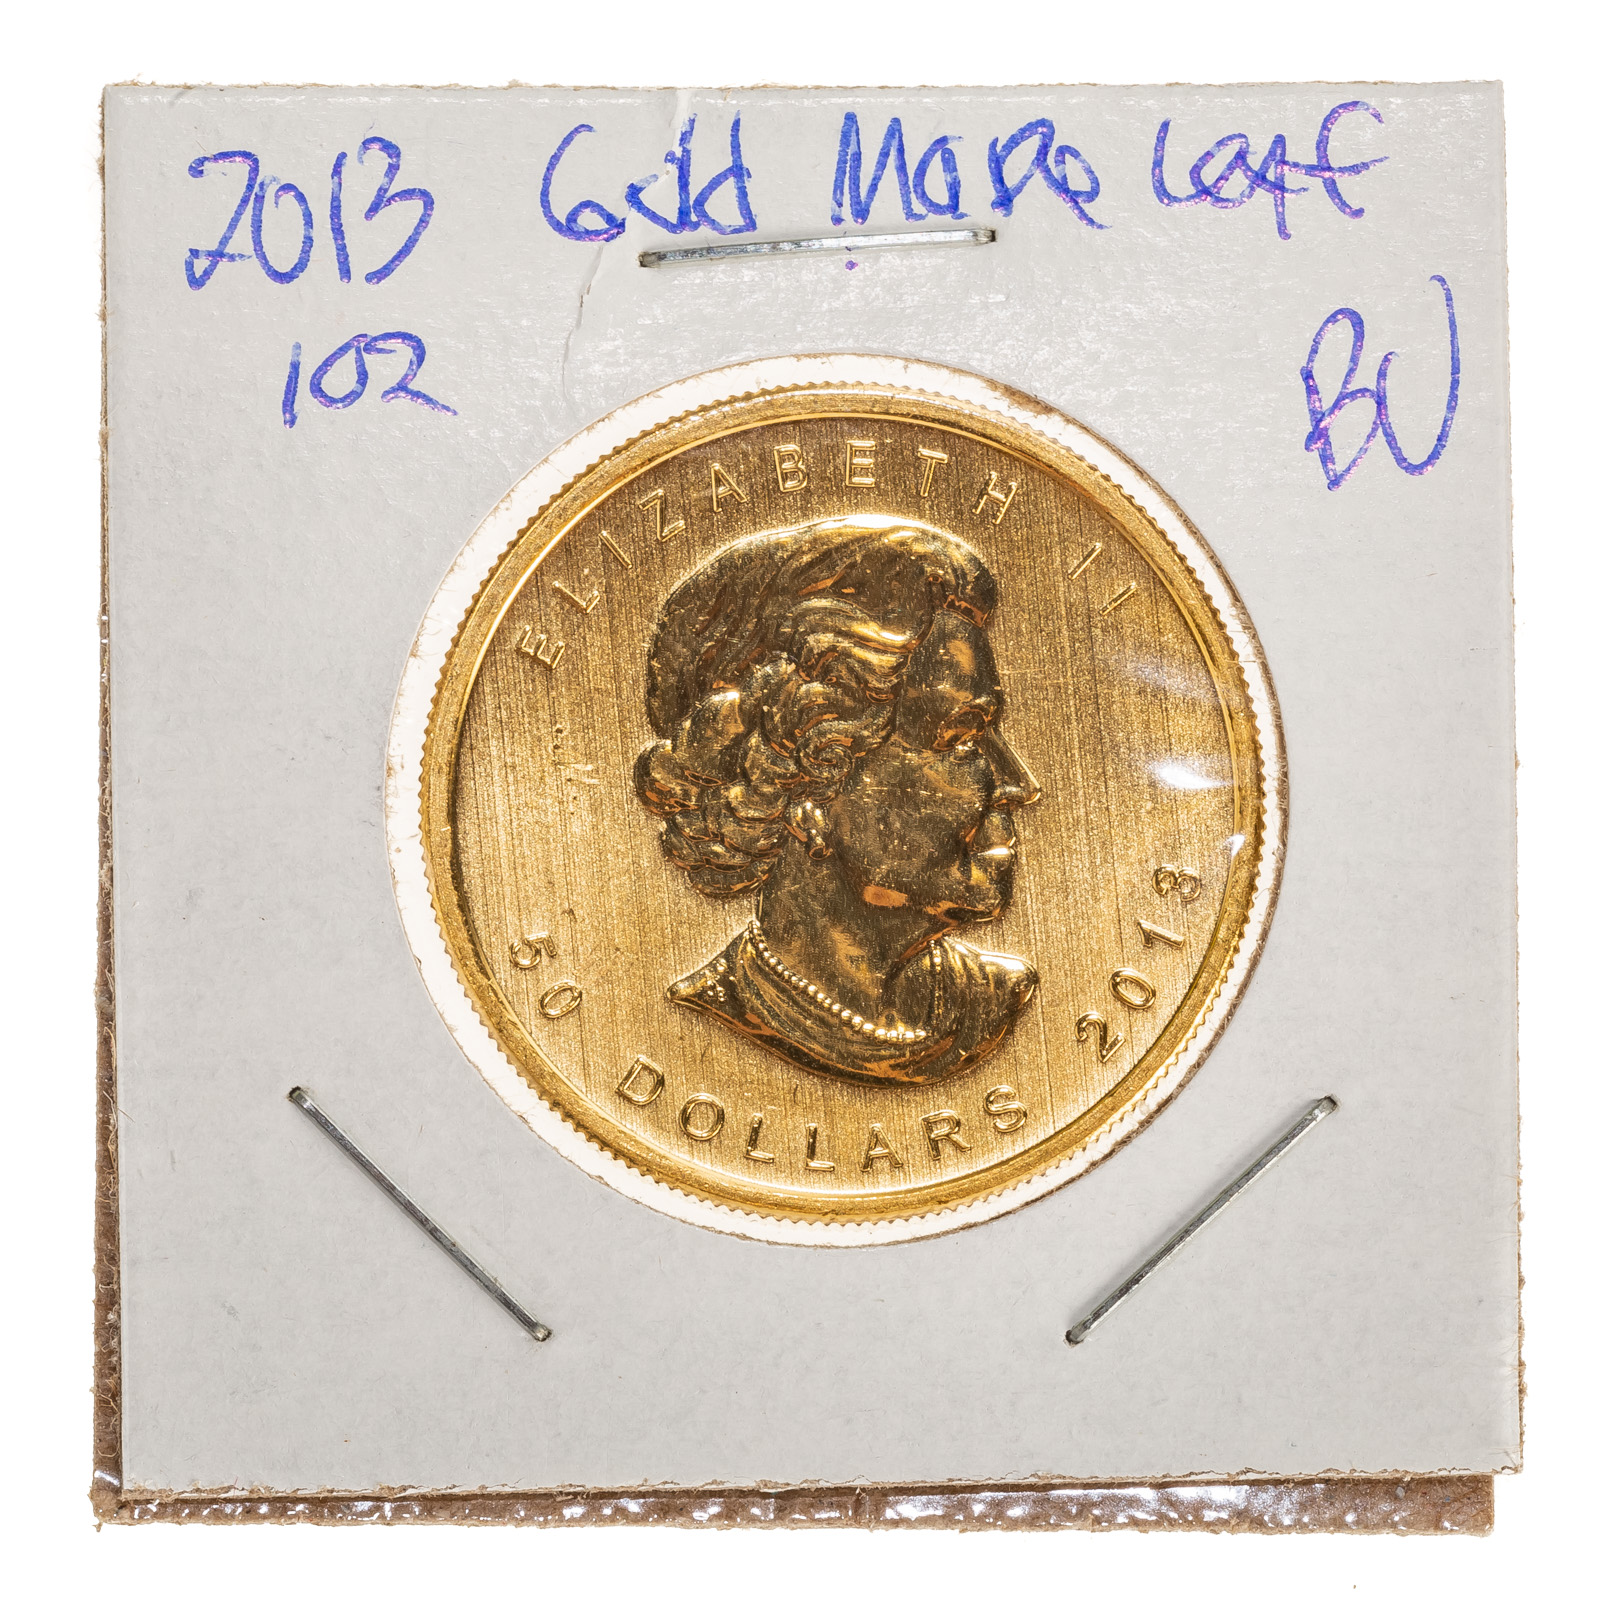 2013 1 OUNCE CANADIAN GOLD MAPLE